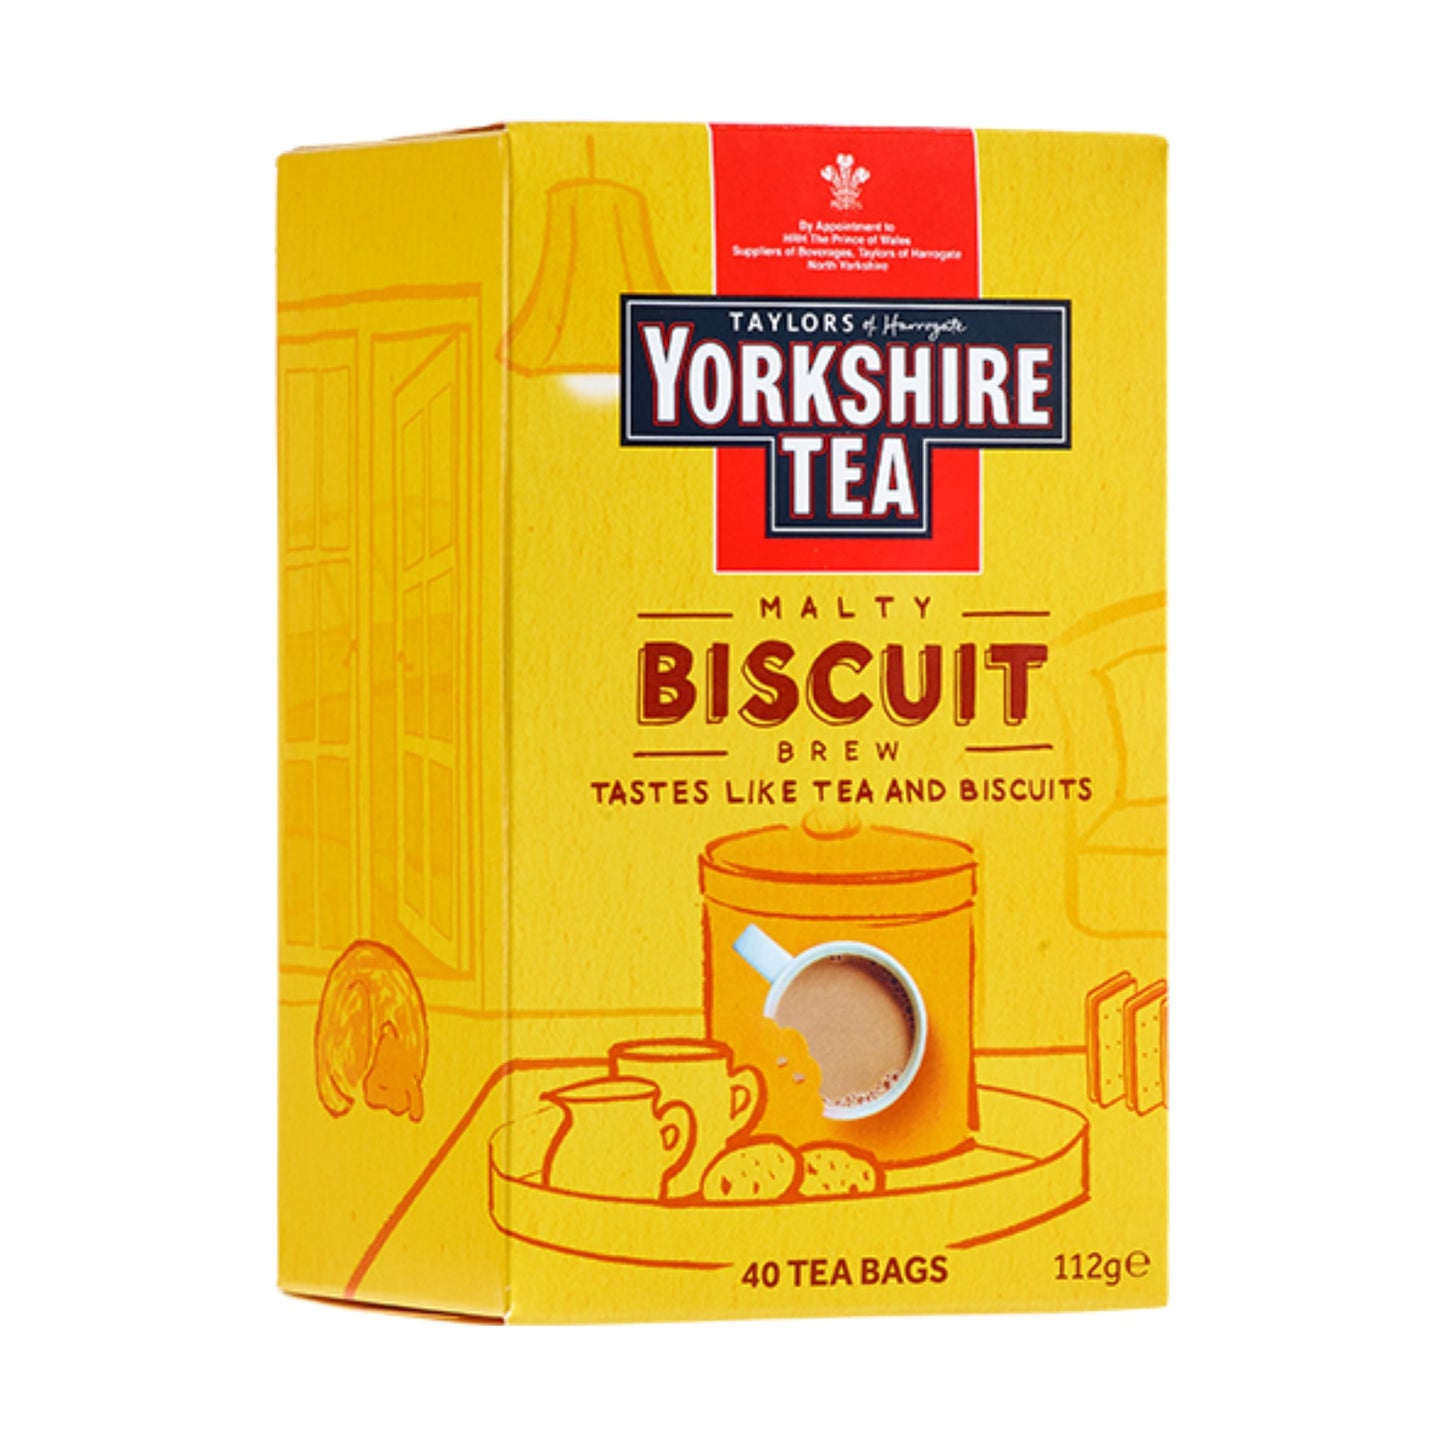 Yorkshire Tea Biscuit Brew - The Great Yorkshire Shop